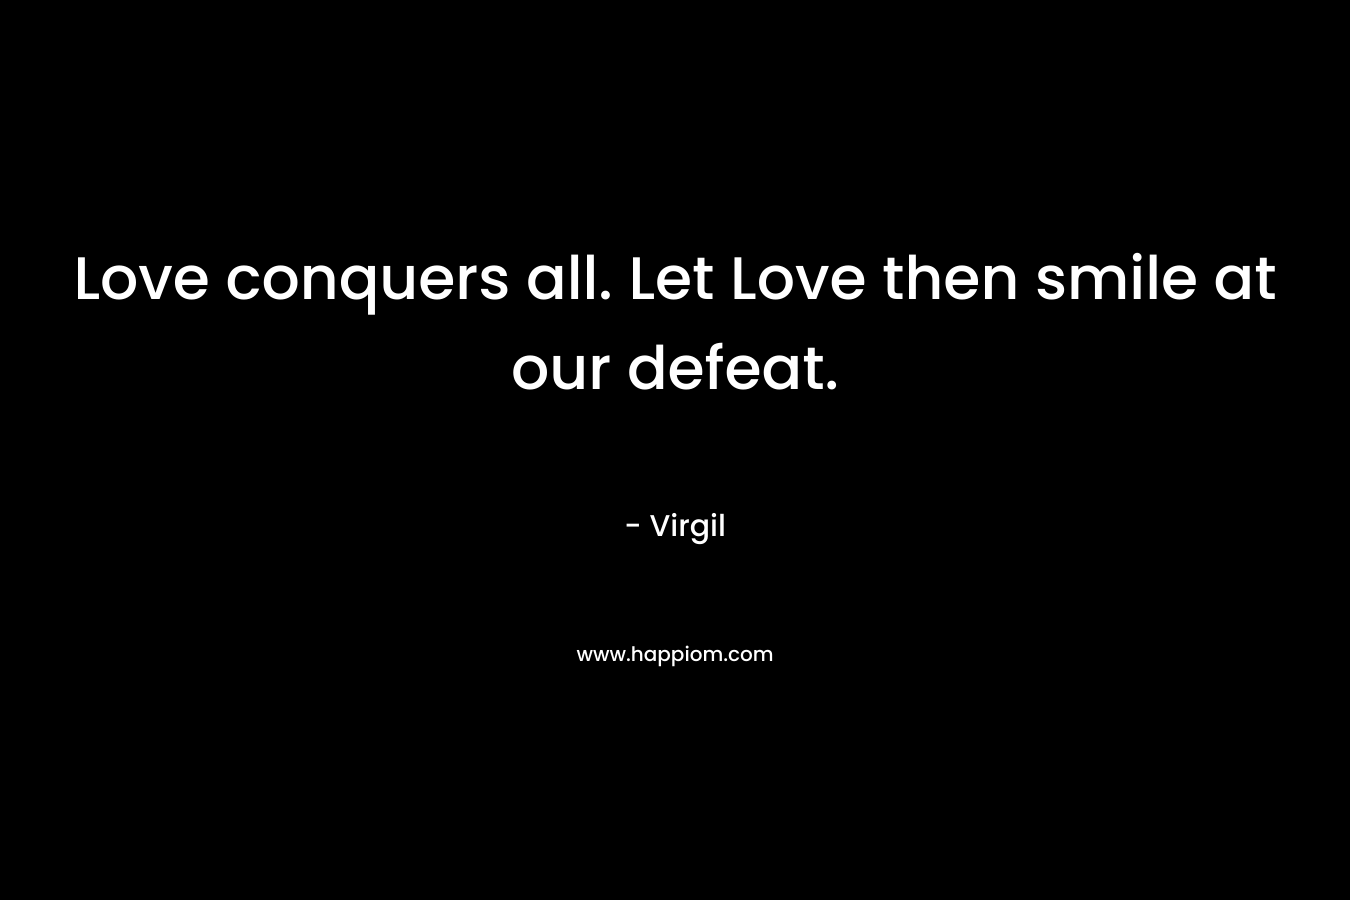 Love conquers all. Let Love then smile at our defeat.